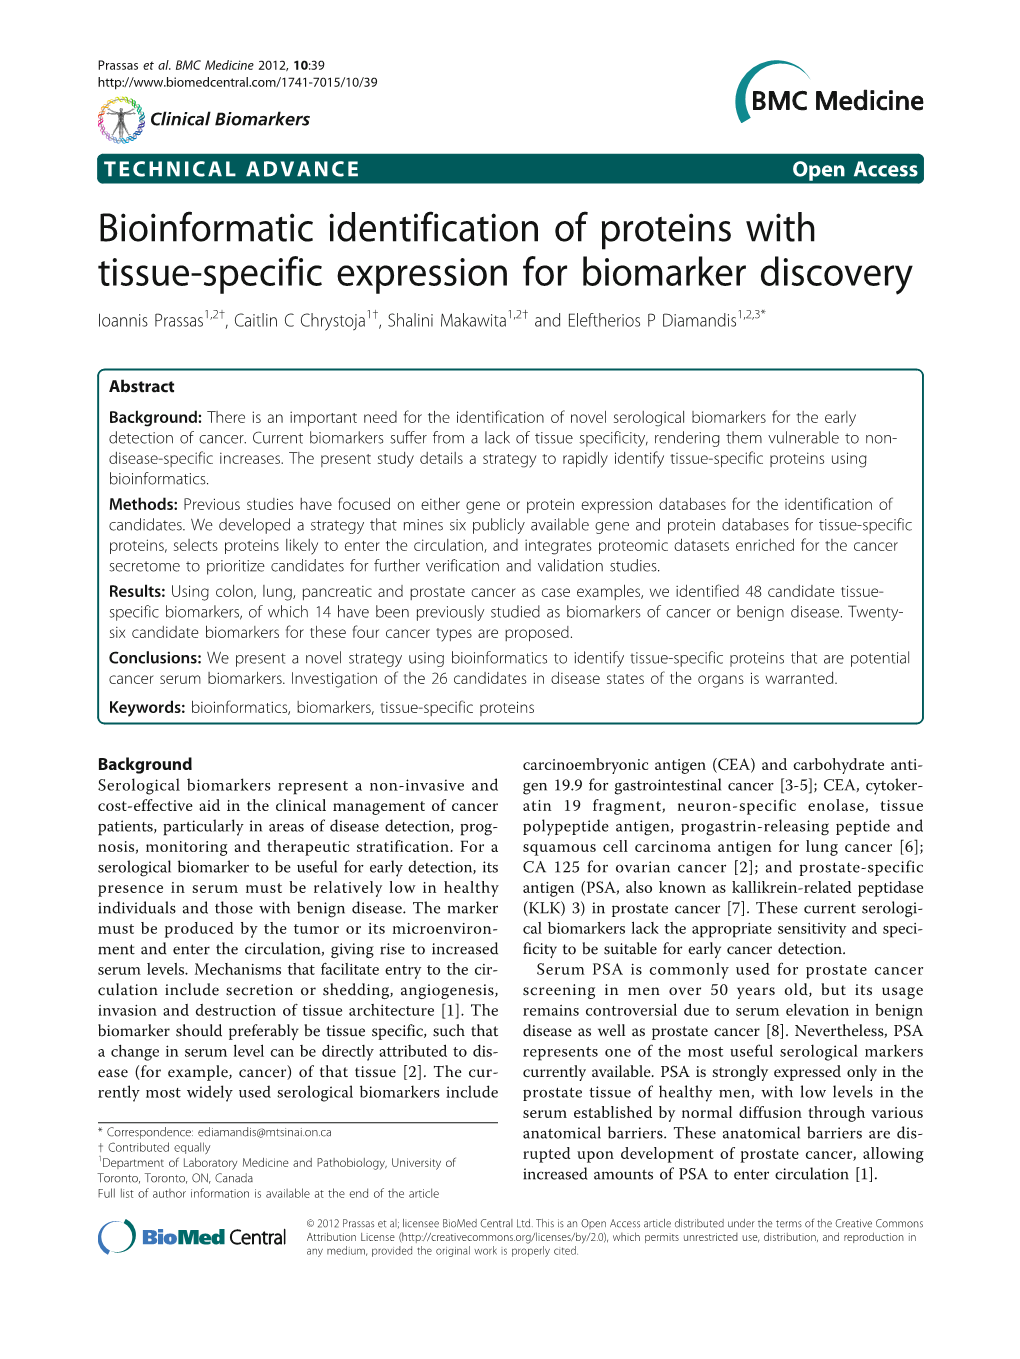 Bioinformatic Identification of Proteins with Tissue-Specific Expression For